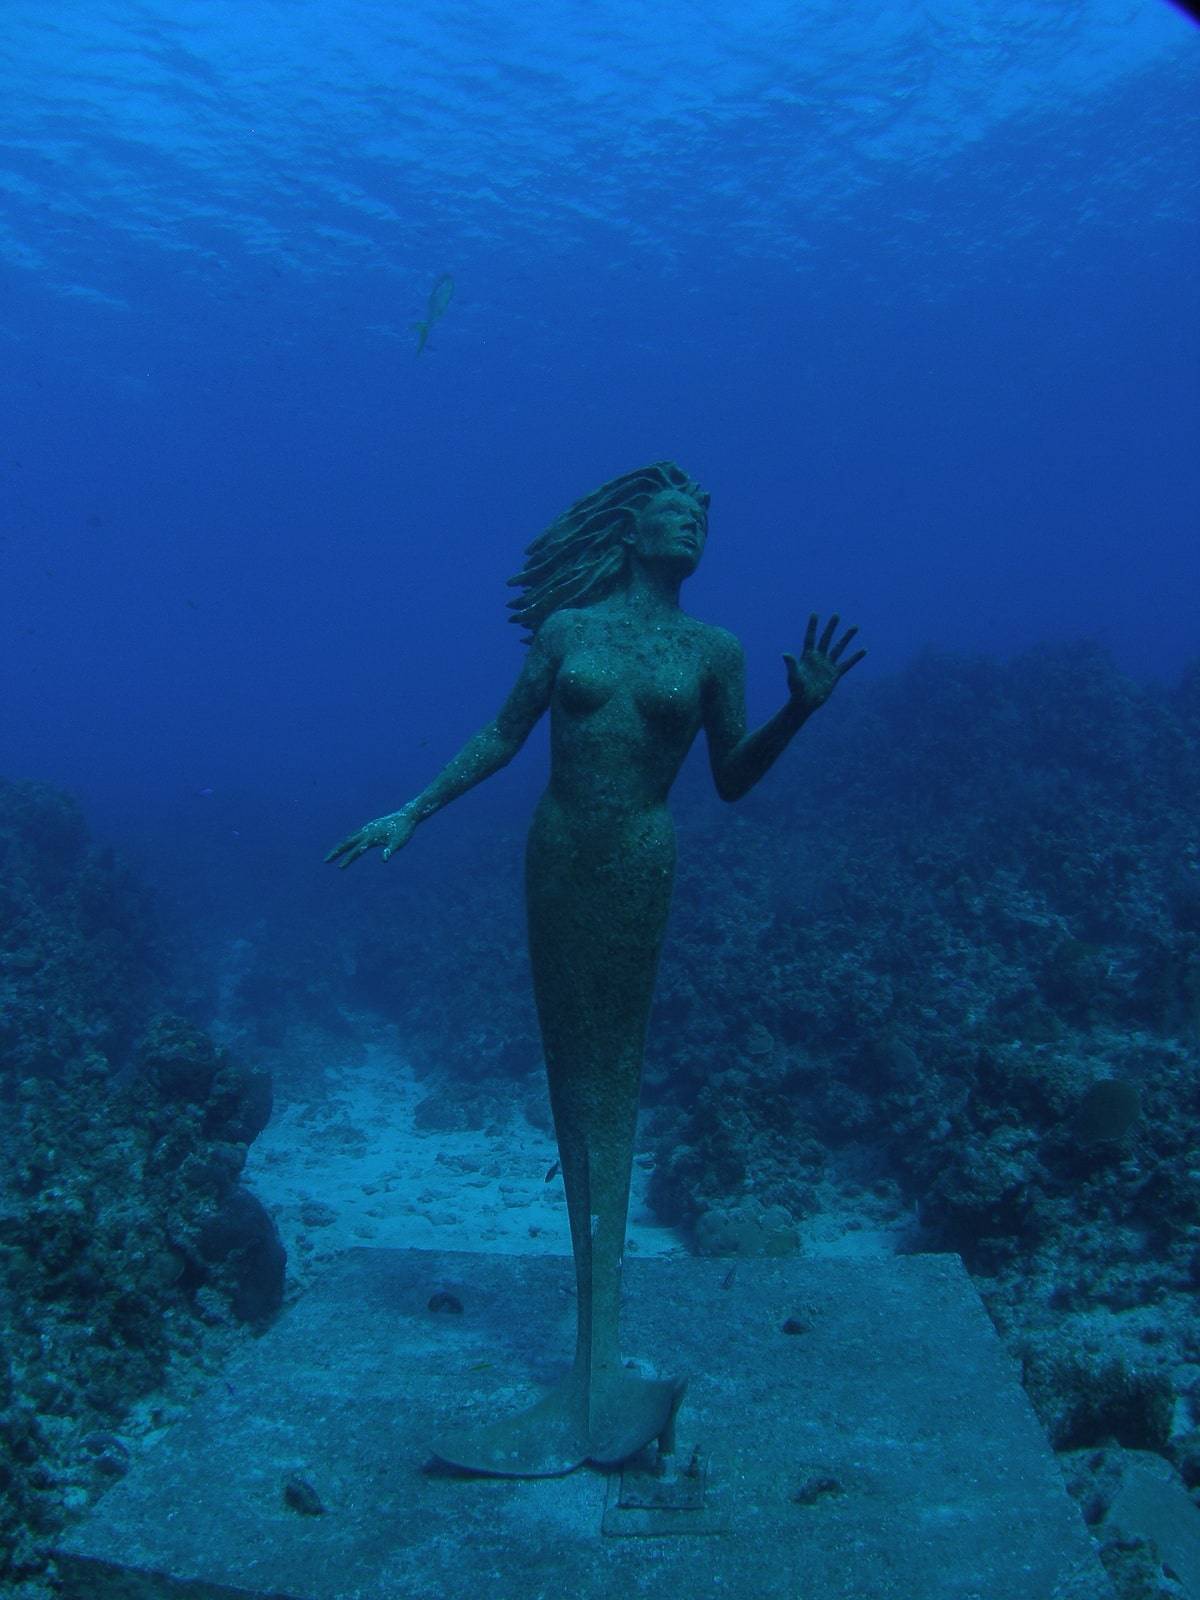 Krystal Cancun Timeshare Invites Travelers to Cancun Underwater Museum in the New Year